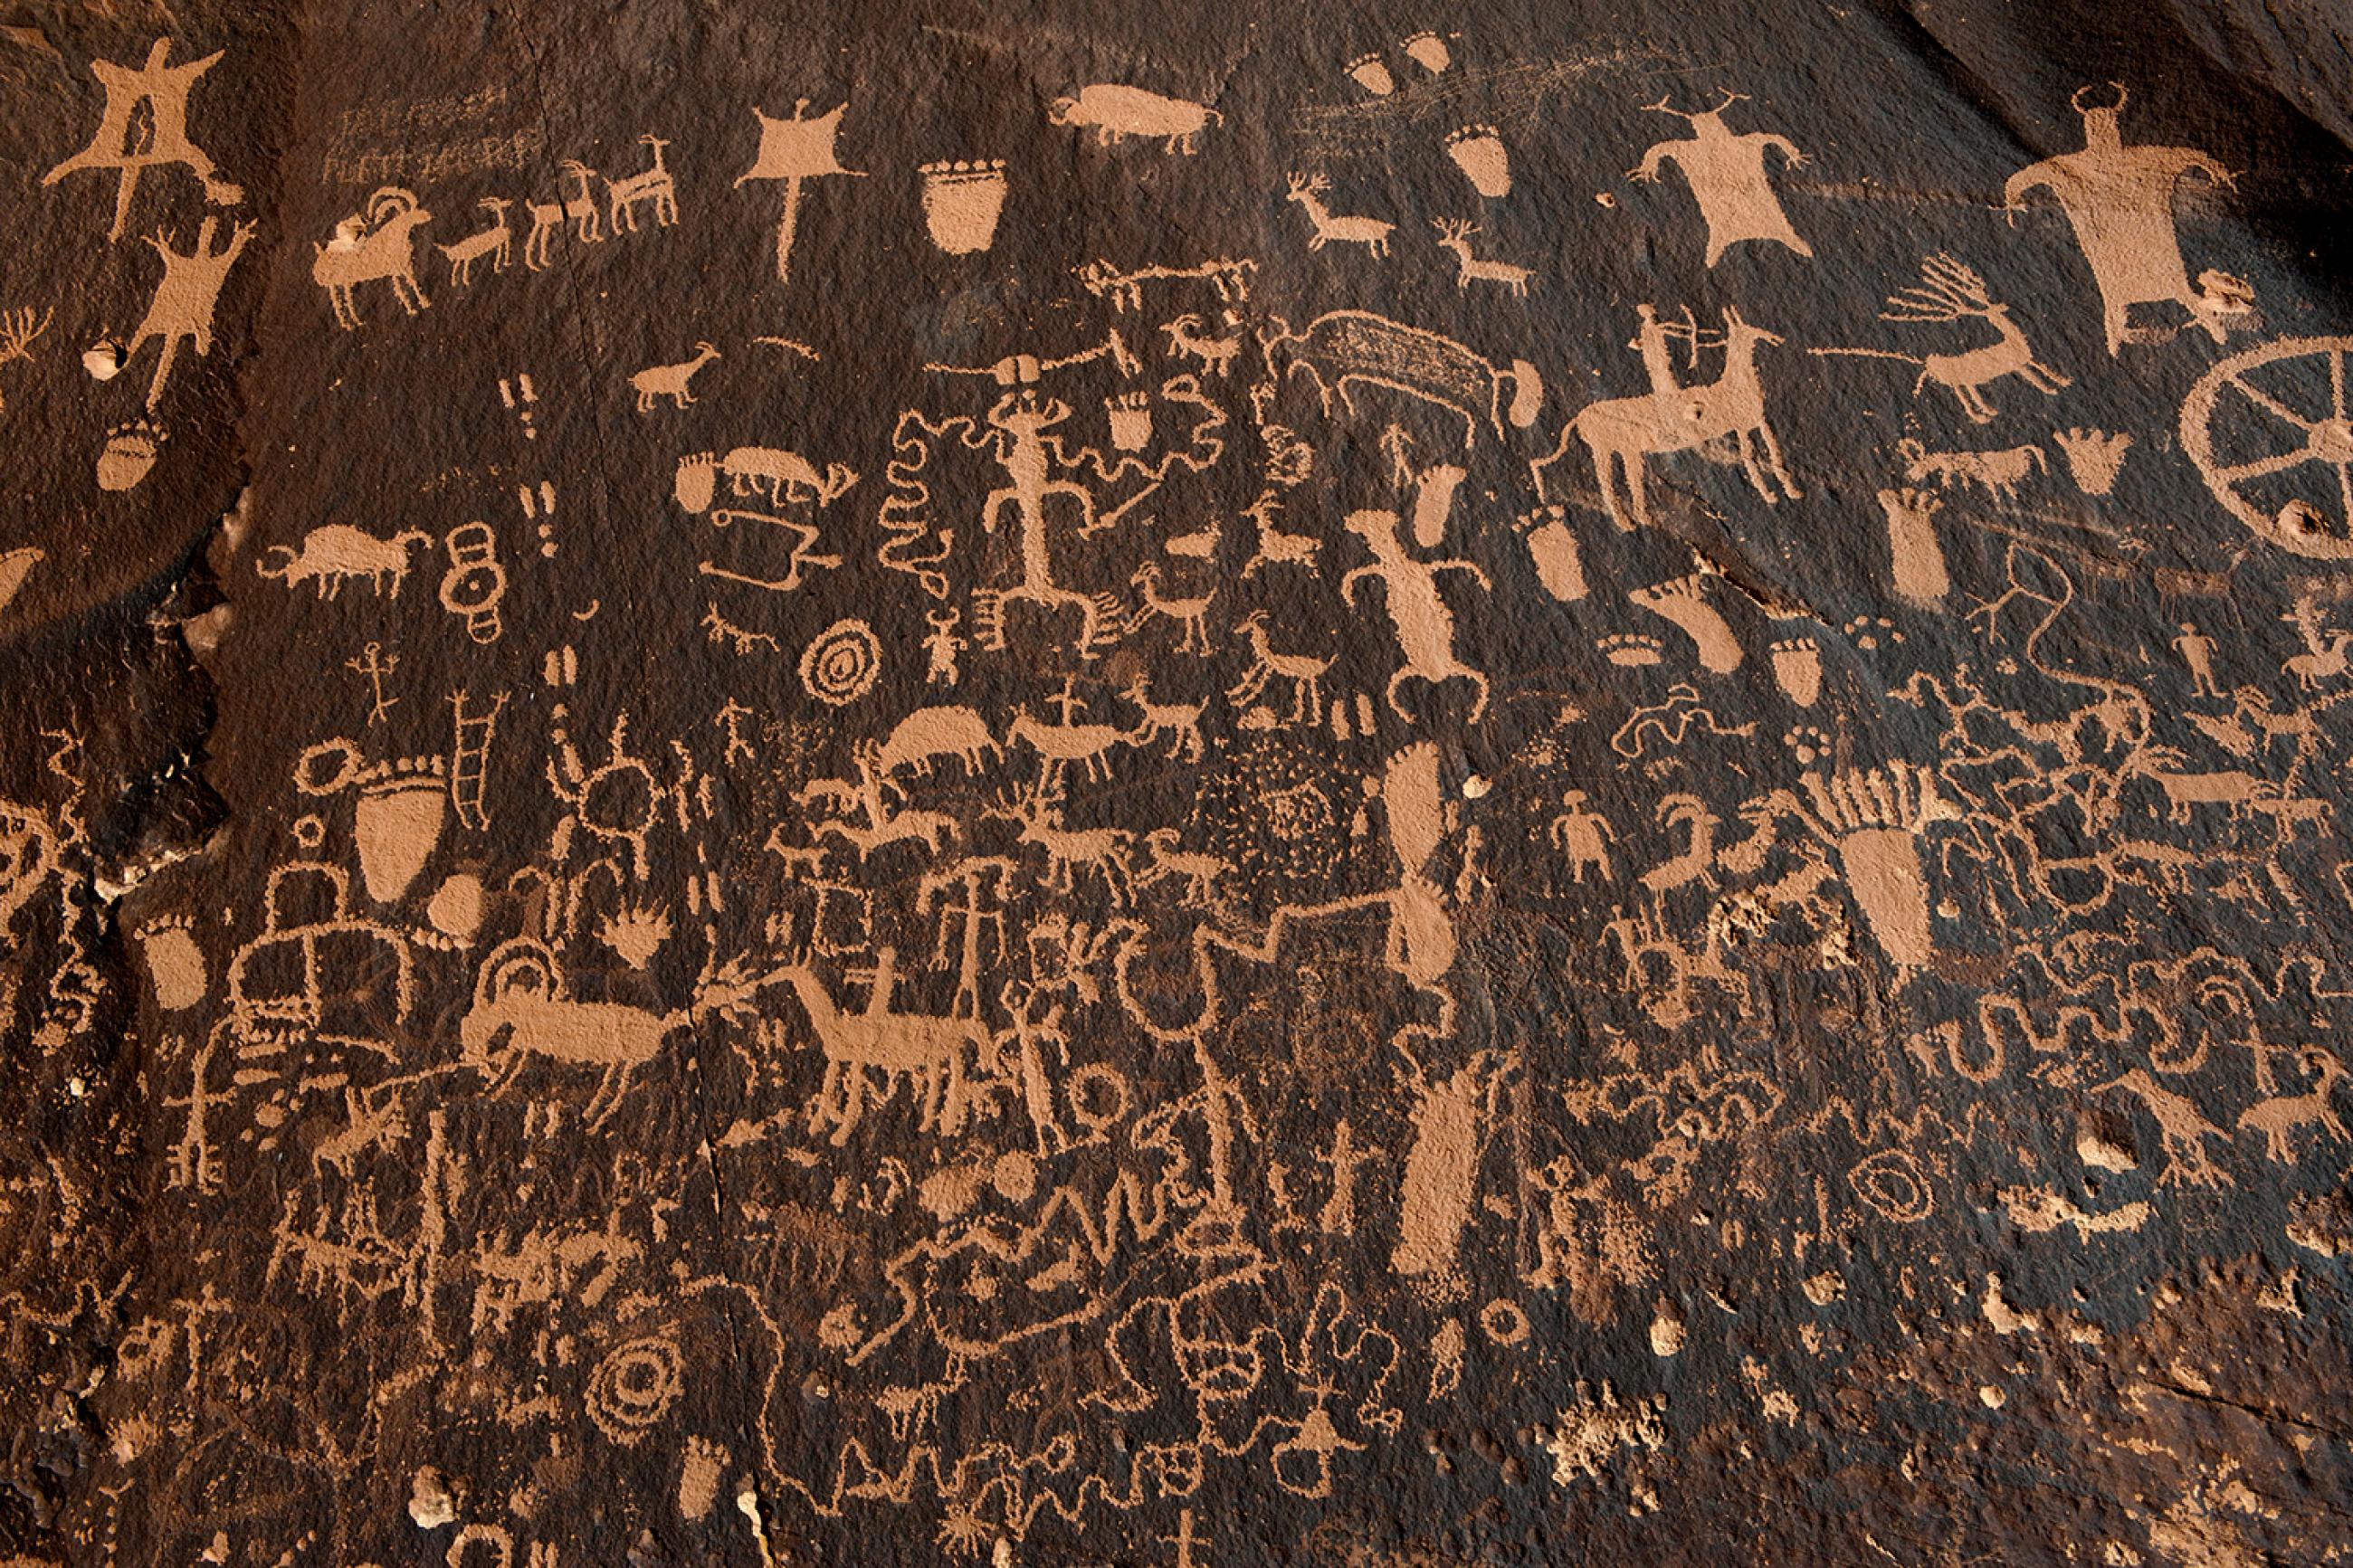 Hundreds of petroglyphs cover Newspaper Rock, in Bears Ears National Monument, Utah, next to the Naajo Nation, on October 29, 2017. The photo shows a dark rock face covered with hundreds of carved depictions of humans and animals. REUTERS/Andrew Cullen